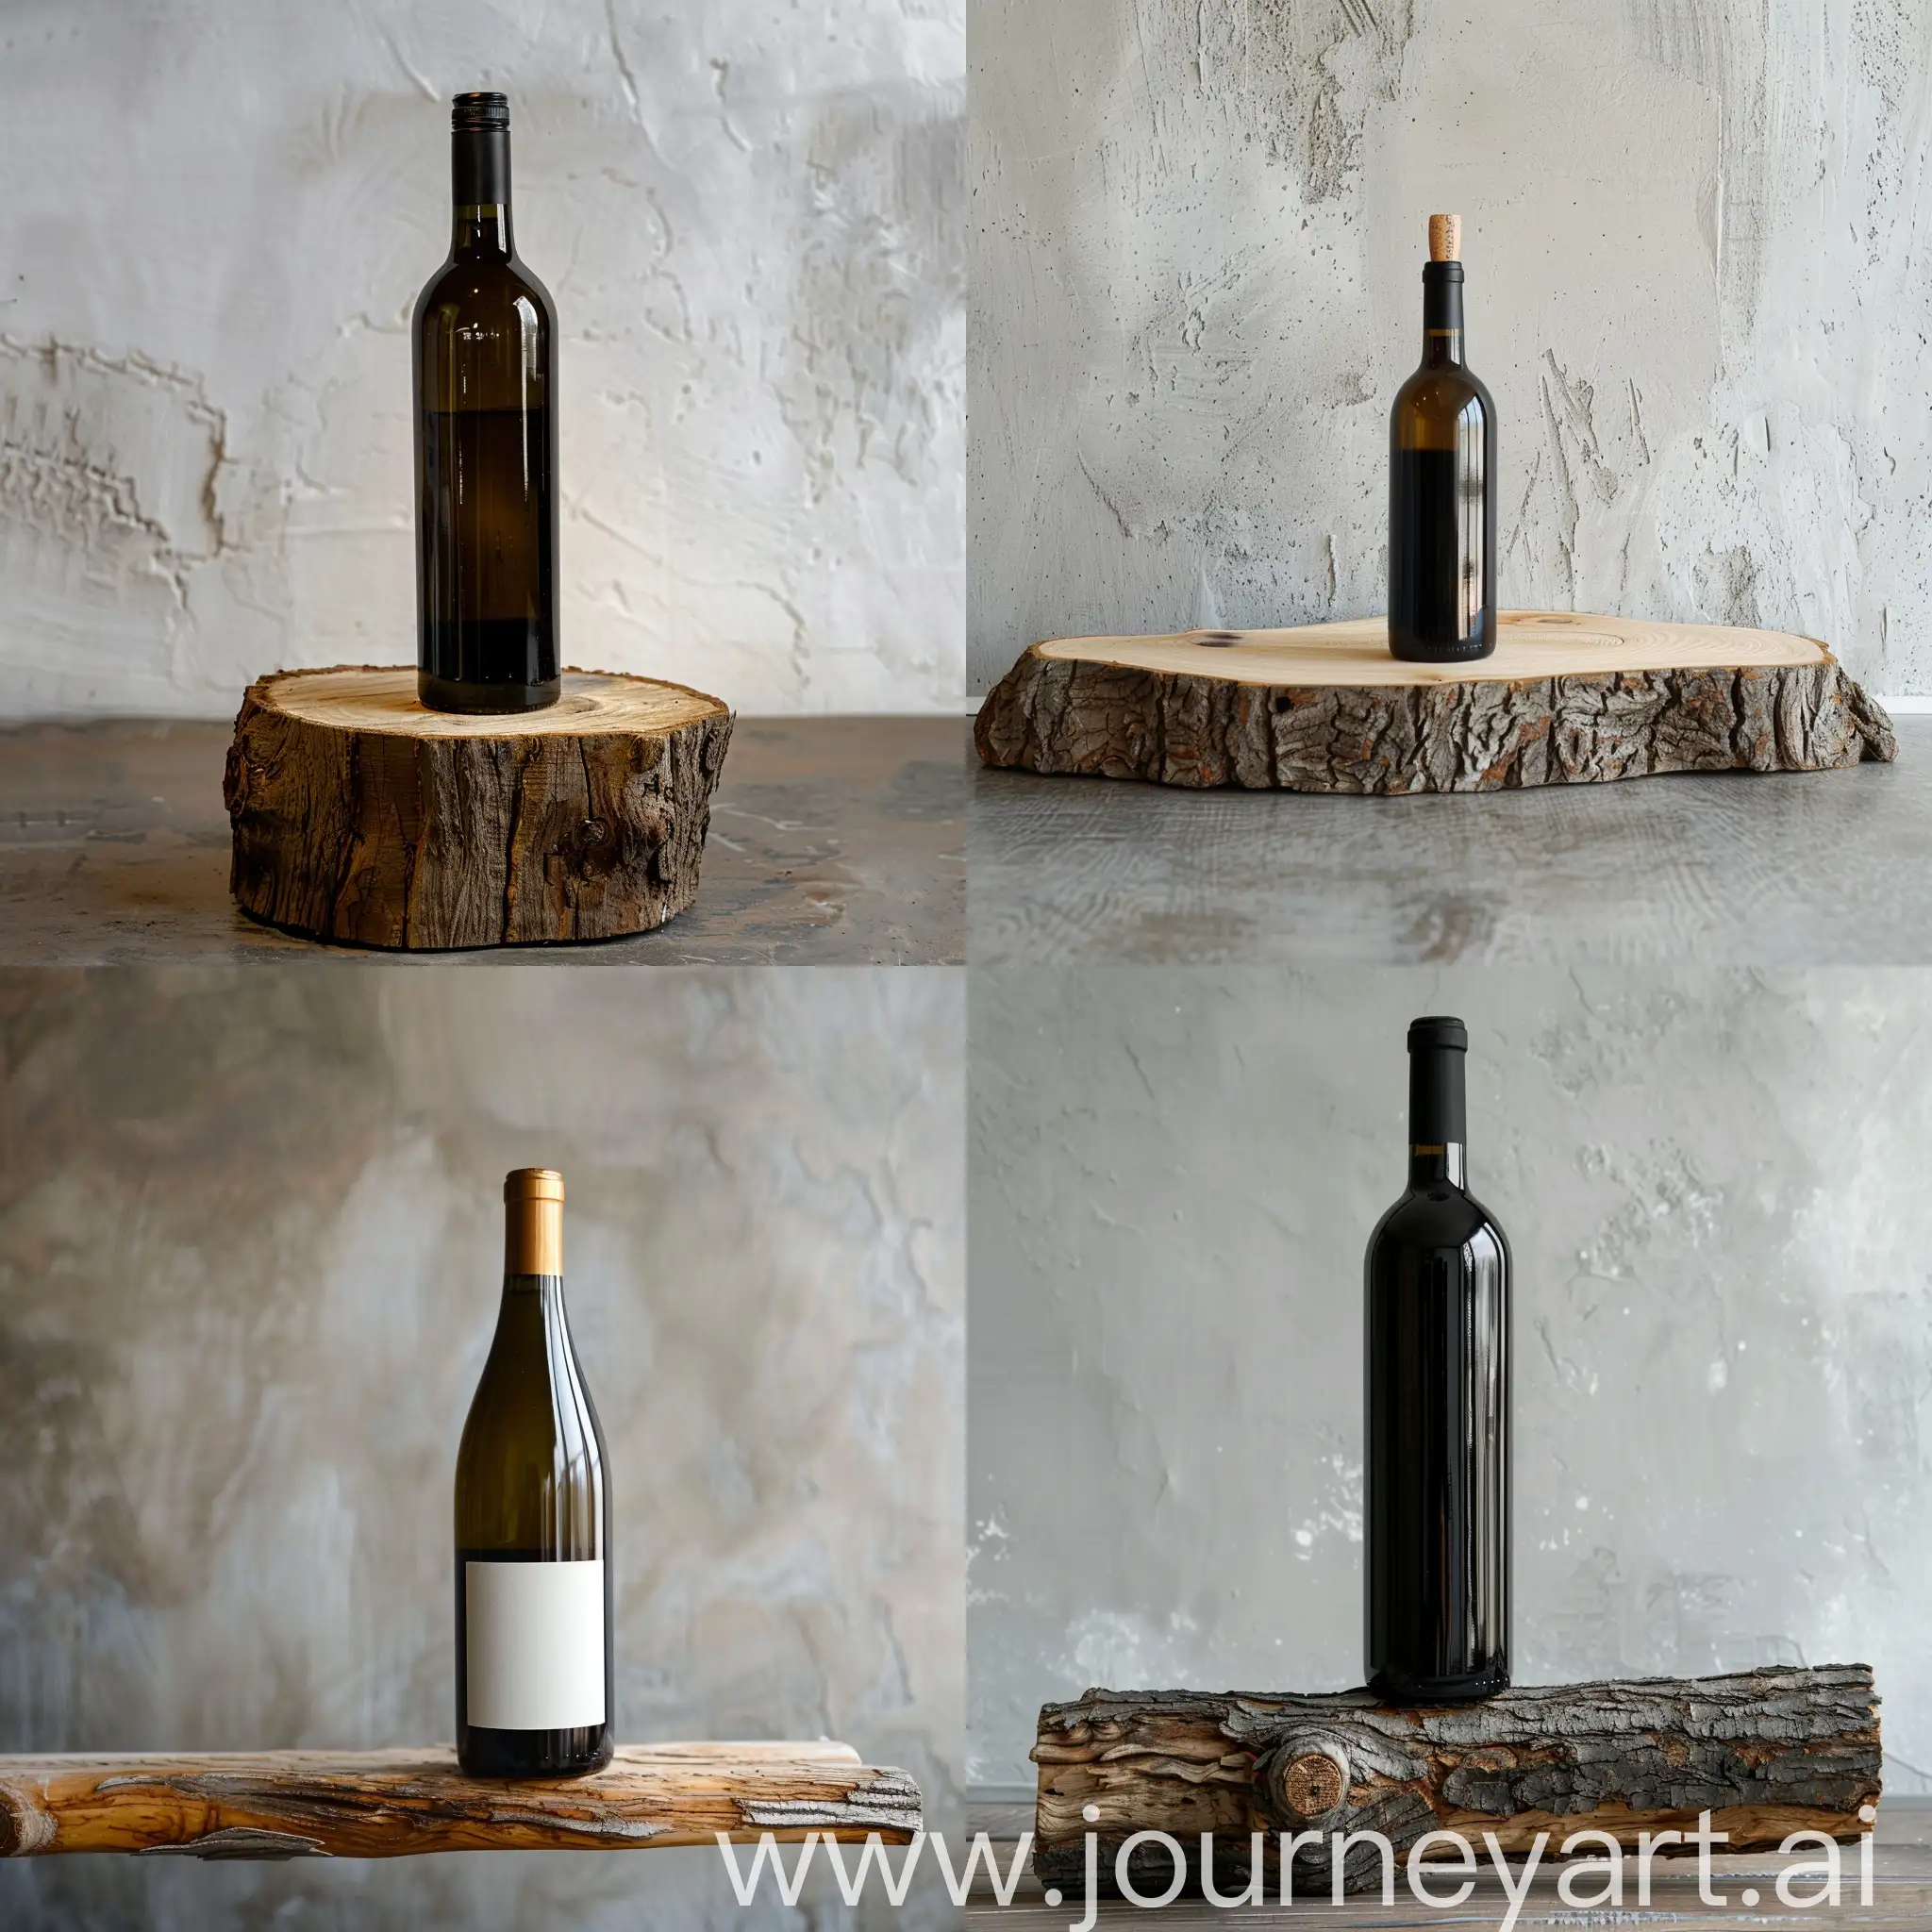 A bottle of wine is kept on wood there is a plain wall behind